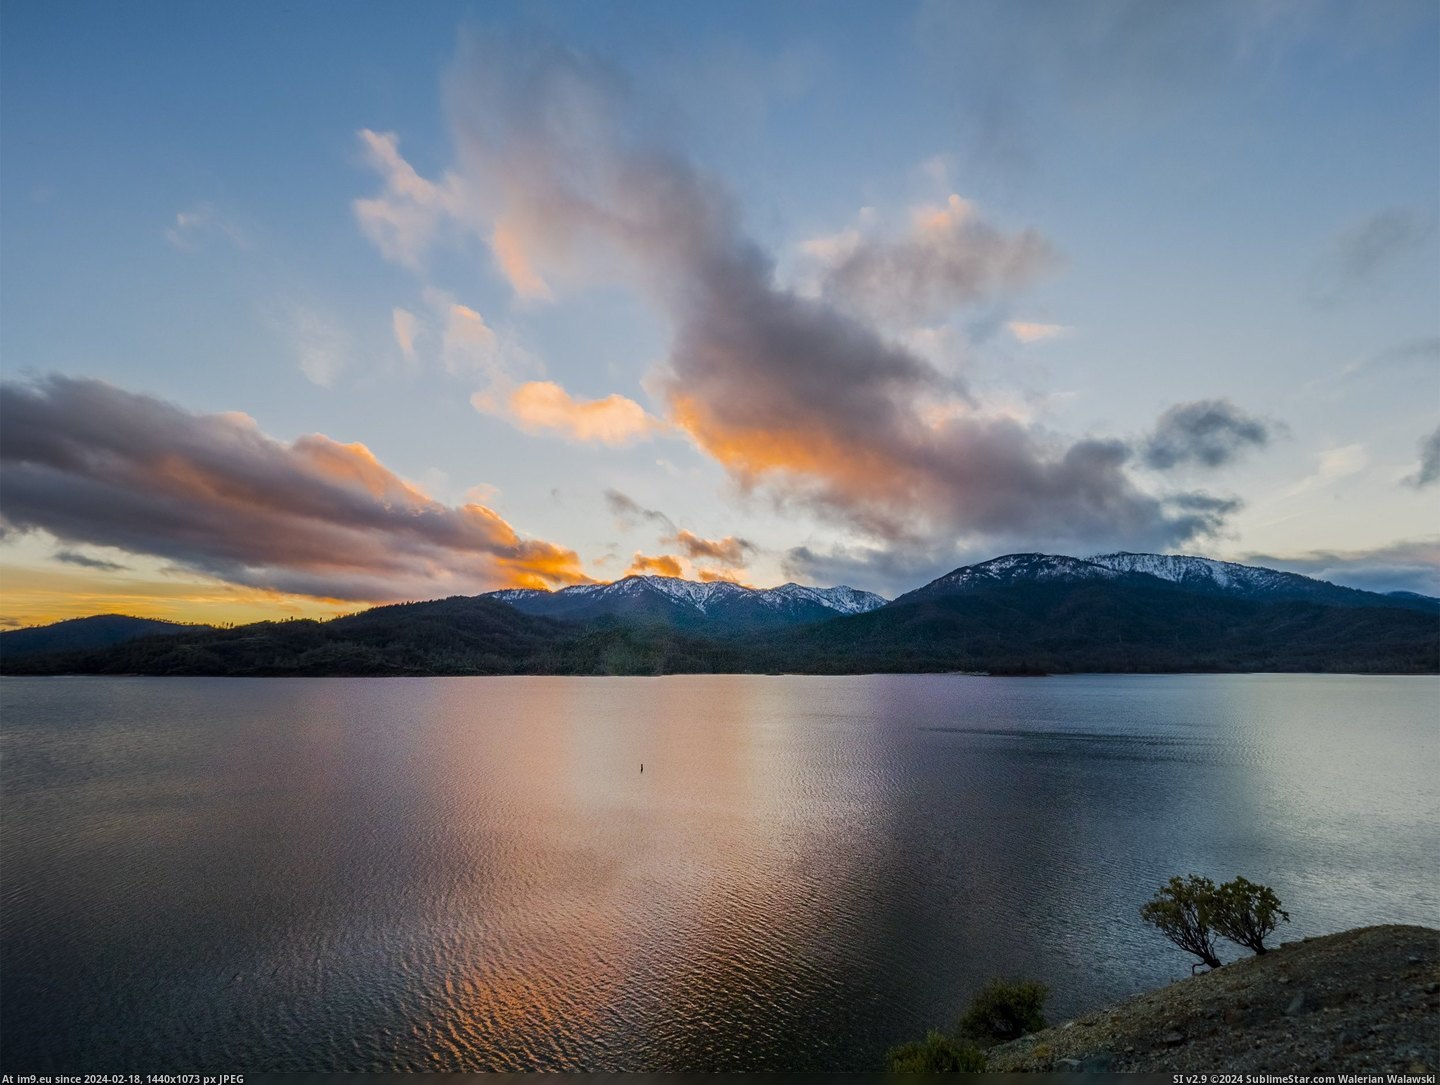 #Lake #California #Sunset #Gorgeous #Northern #Capped #Snow #Tonight #Mountains [Earthporn] Tonight's Sunset over Whiskeytown Lake in Northern California and Snow-Capped Mountains was gorgeous. [2500x1875] Pic. (Bild von album My r/EARTHPORN favs))